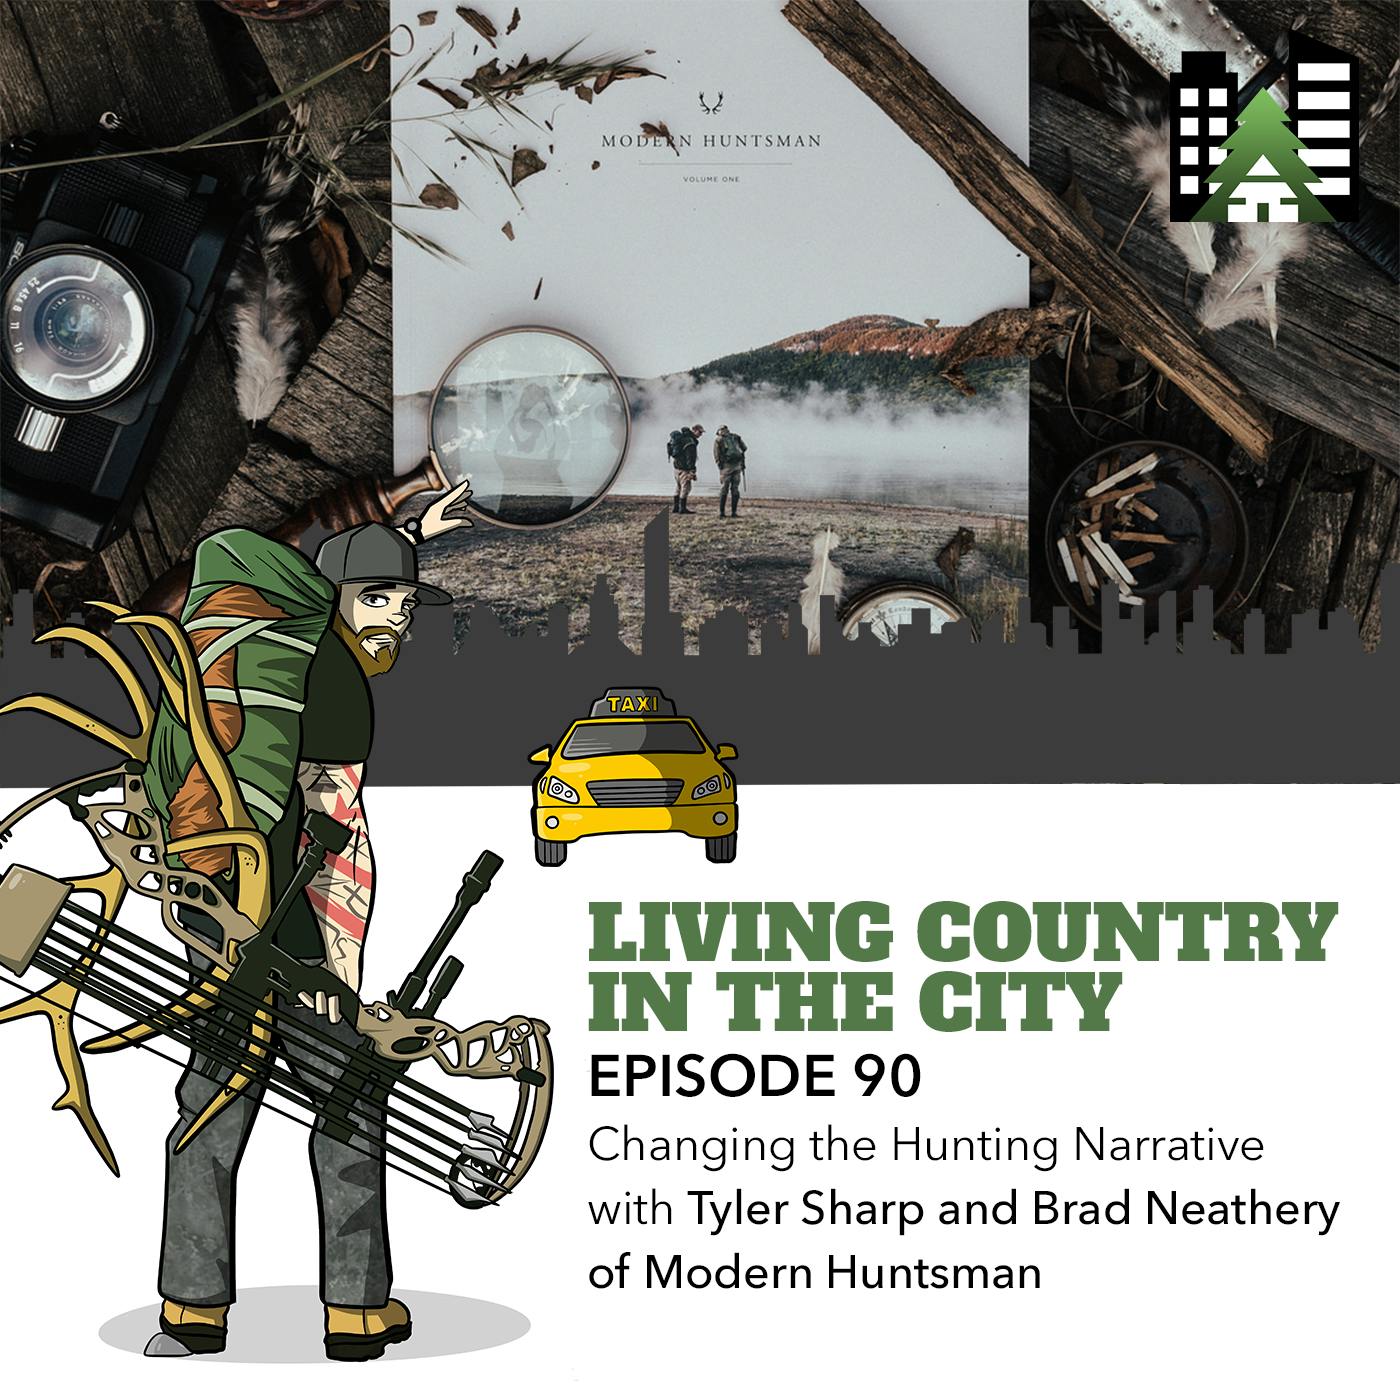 Ep 90 - Changing the Hunting Narrative with Tyler Sharp and Brad Neathery of Modern Huntsman